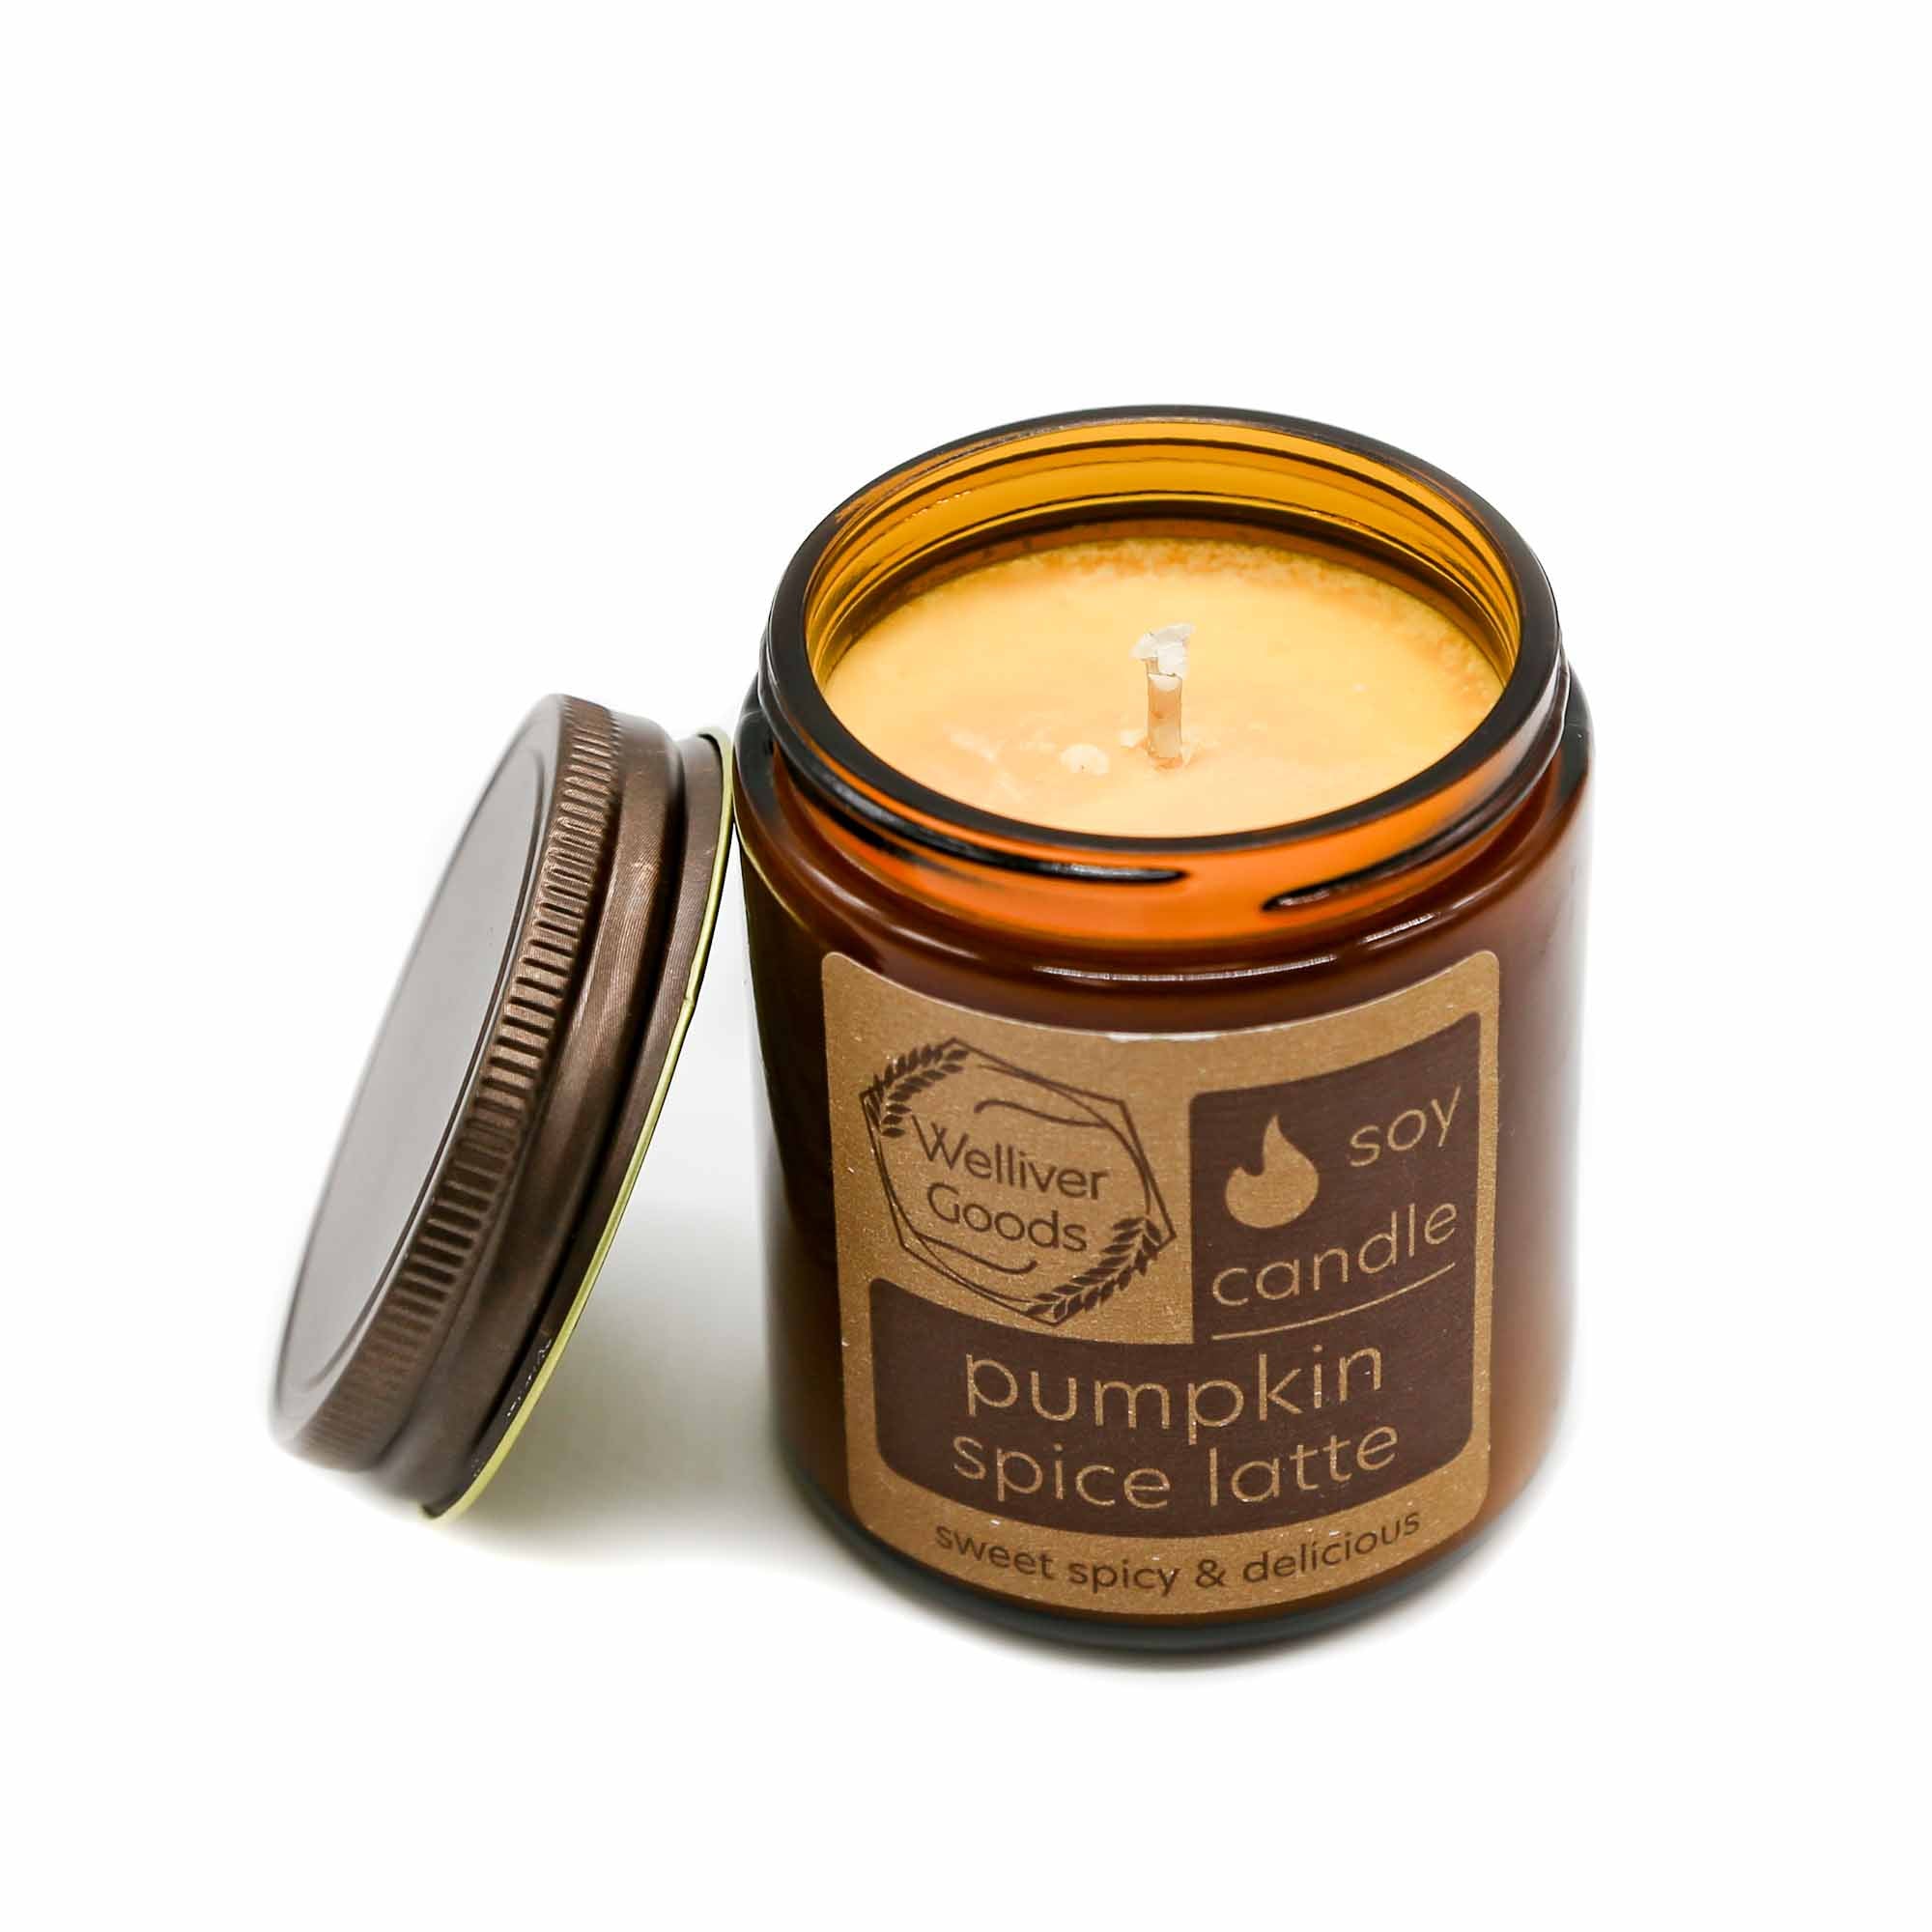 welliver goods candle - pumpkin spice latte - Mortise And Tenon